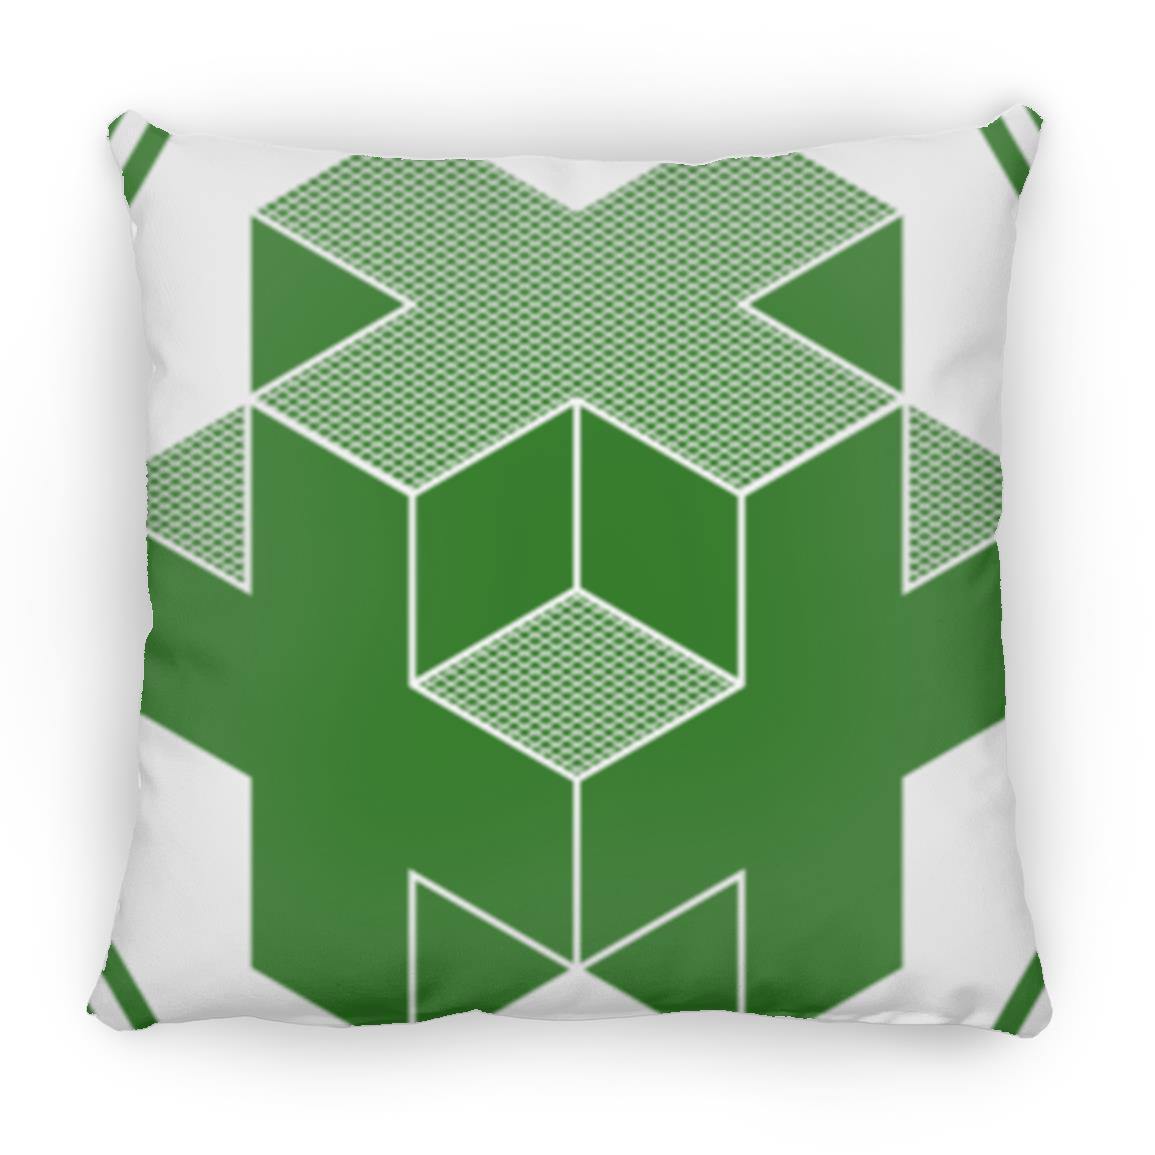 Crop Circle Pillow - Cley Hill - Shapes of Wisdom